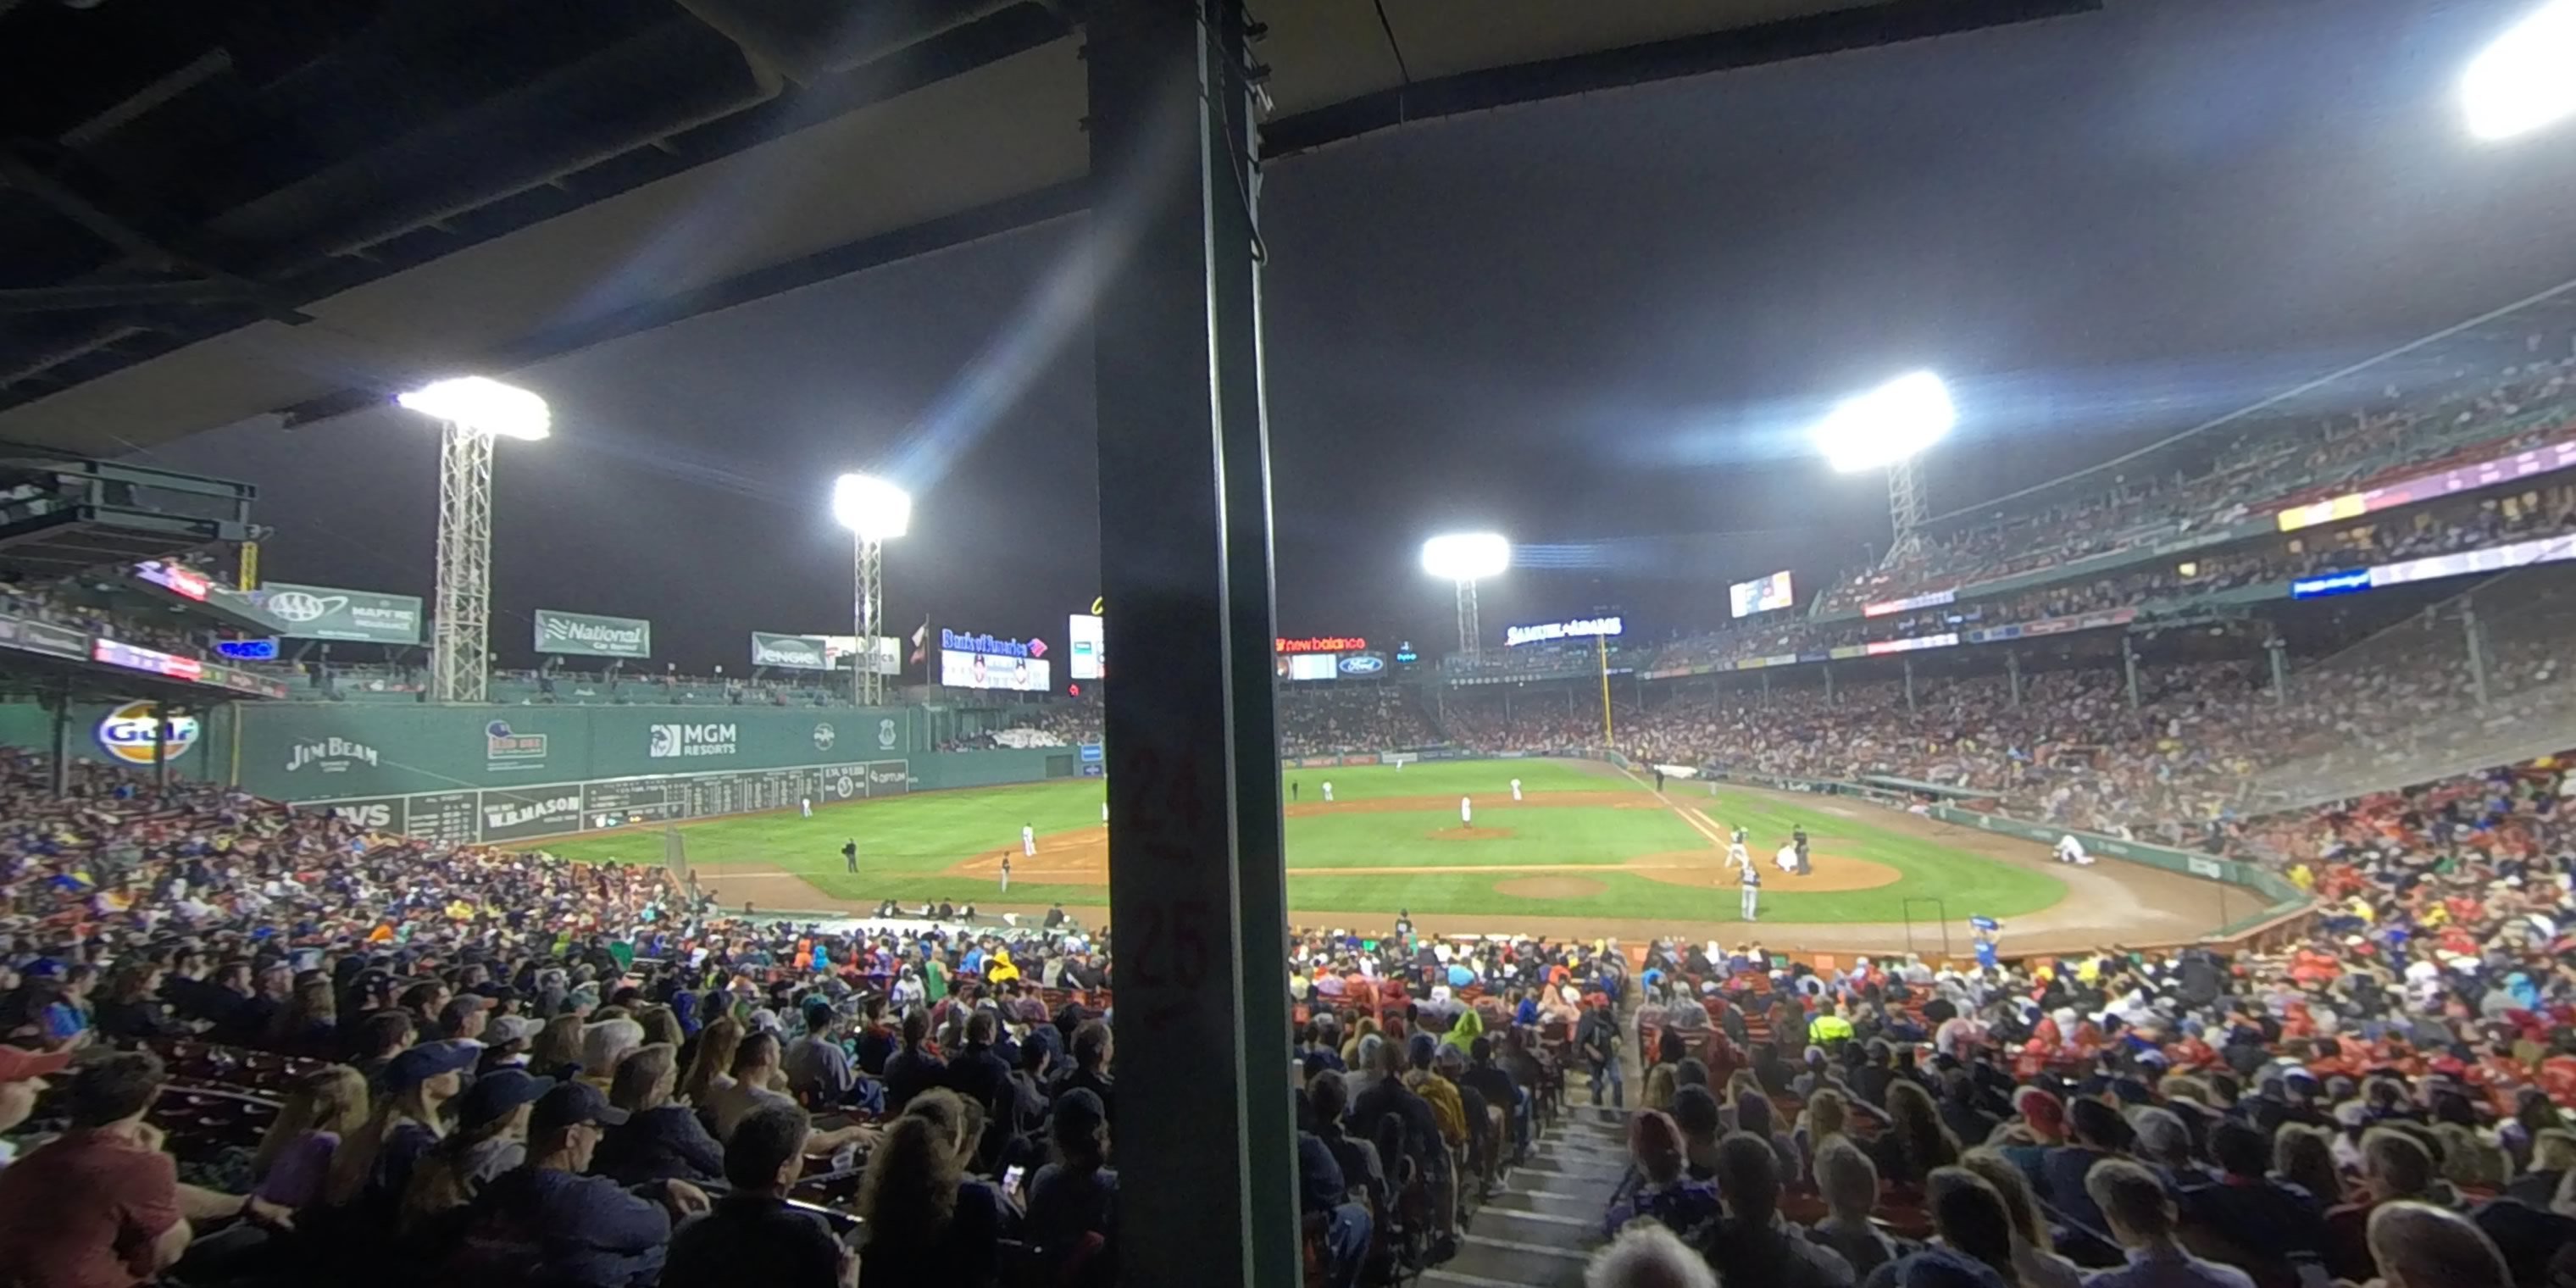 grandstand 24 panoramic seat view  for baseball - fenway park